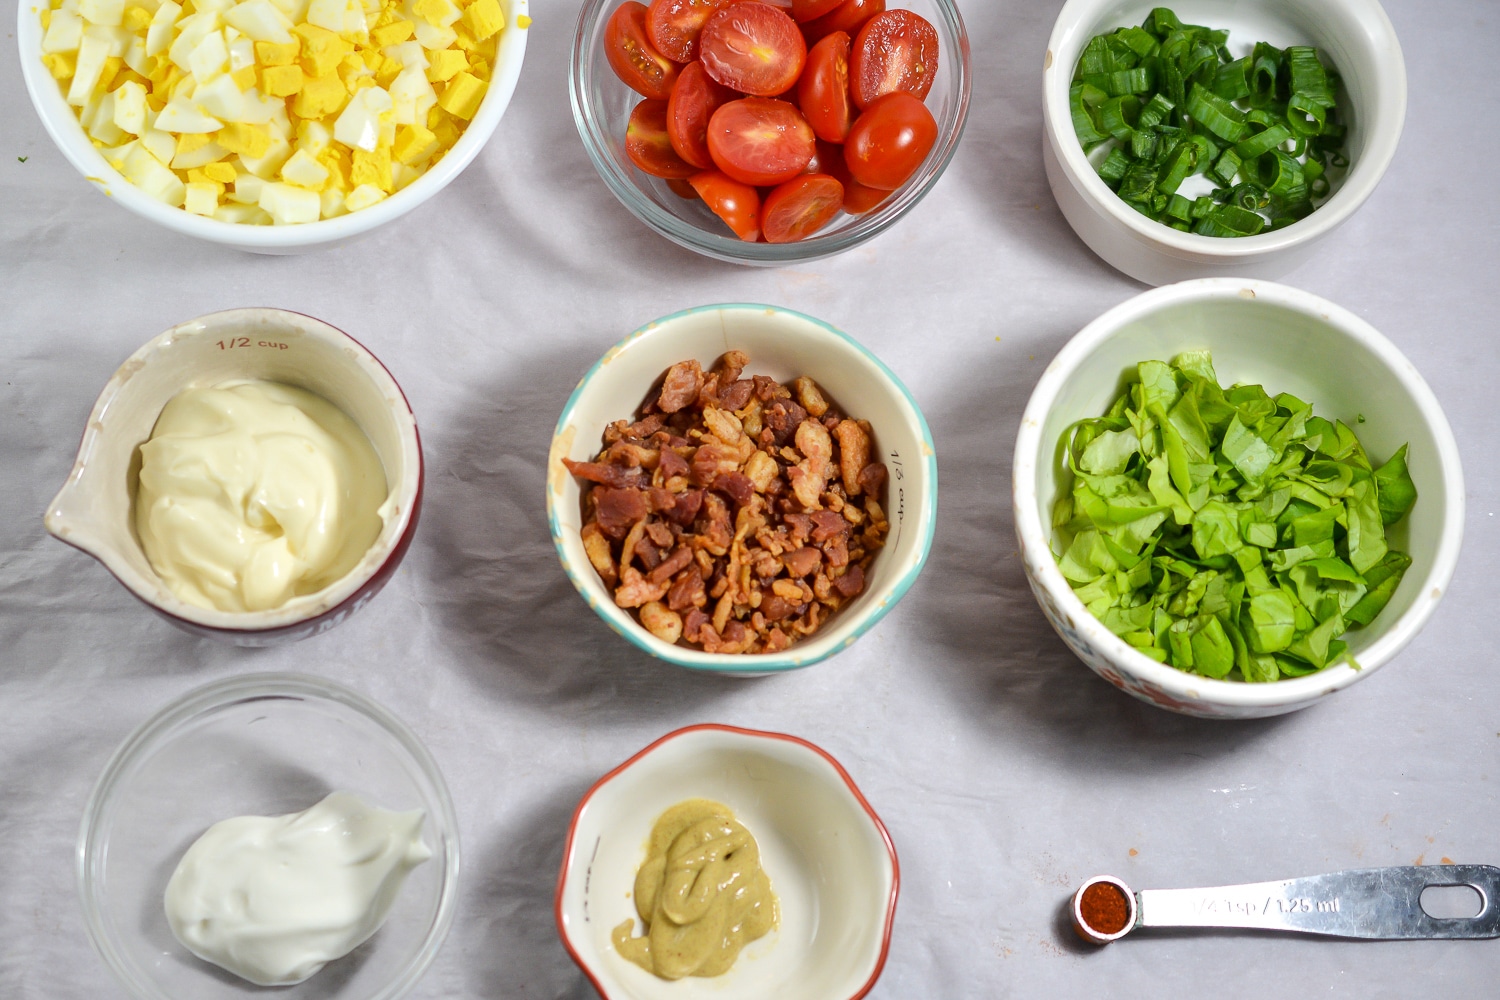 Overhead shot of all prepared ingredients for making keto egg salad including chopped hard boiled eggs, crumbled bacon, halved cherry tomatoes, butter lettuce, chopped onion, mayonnaise, mustard and seasonings